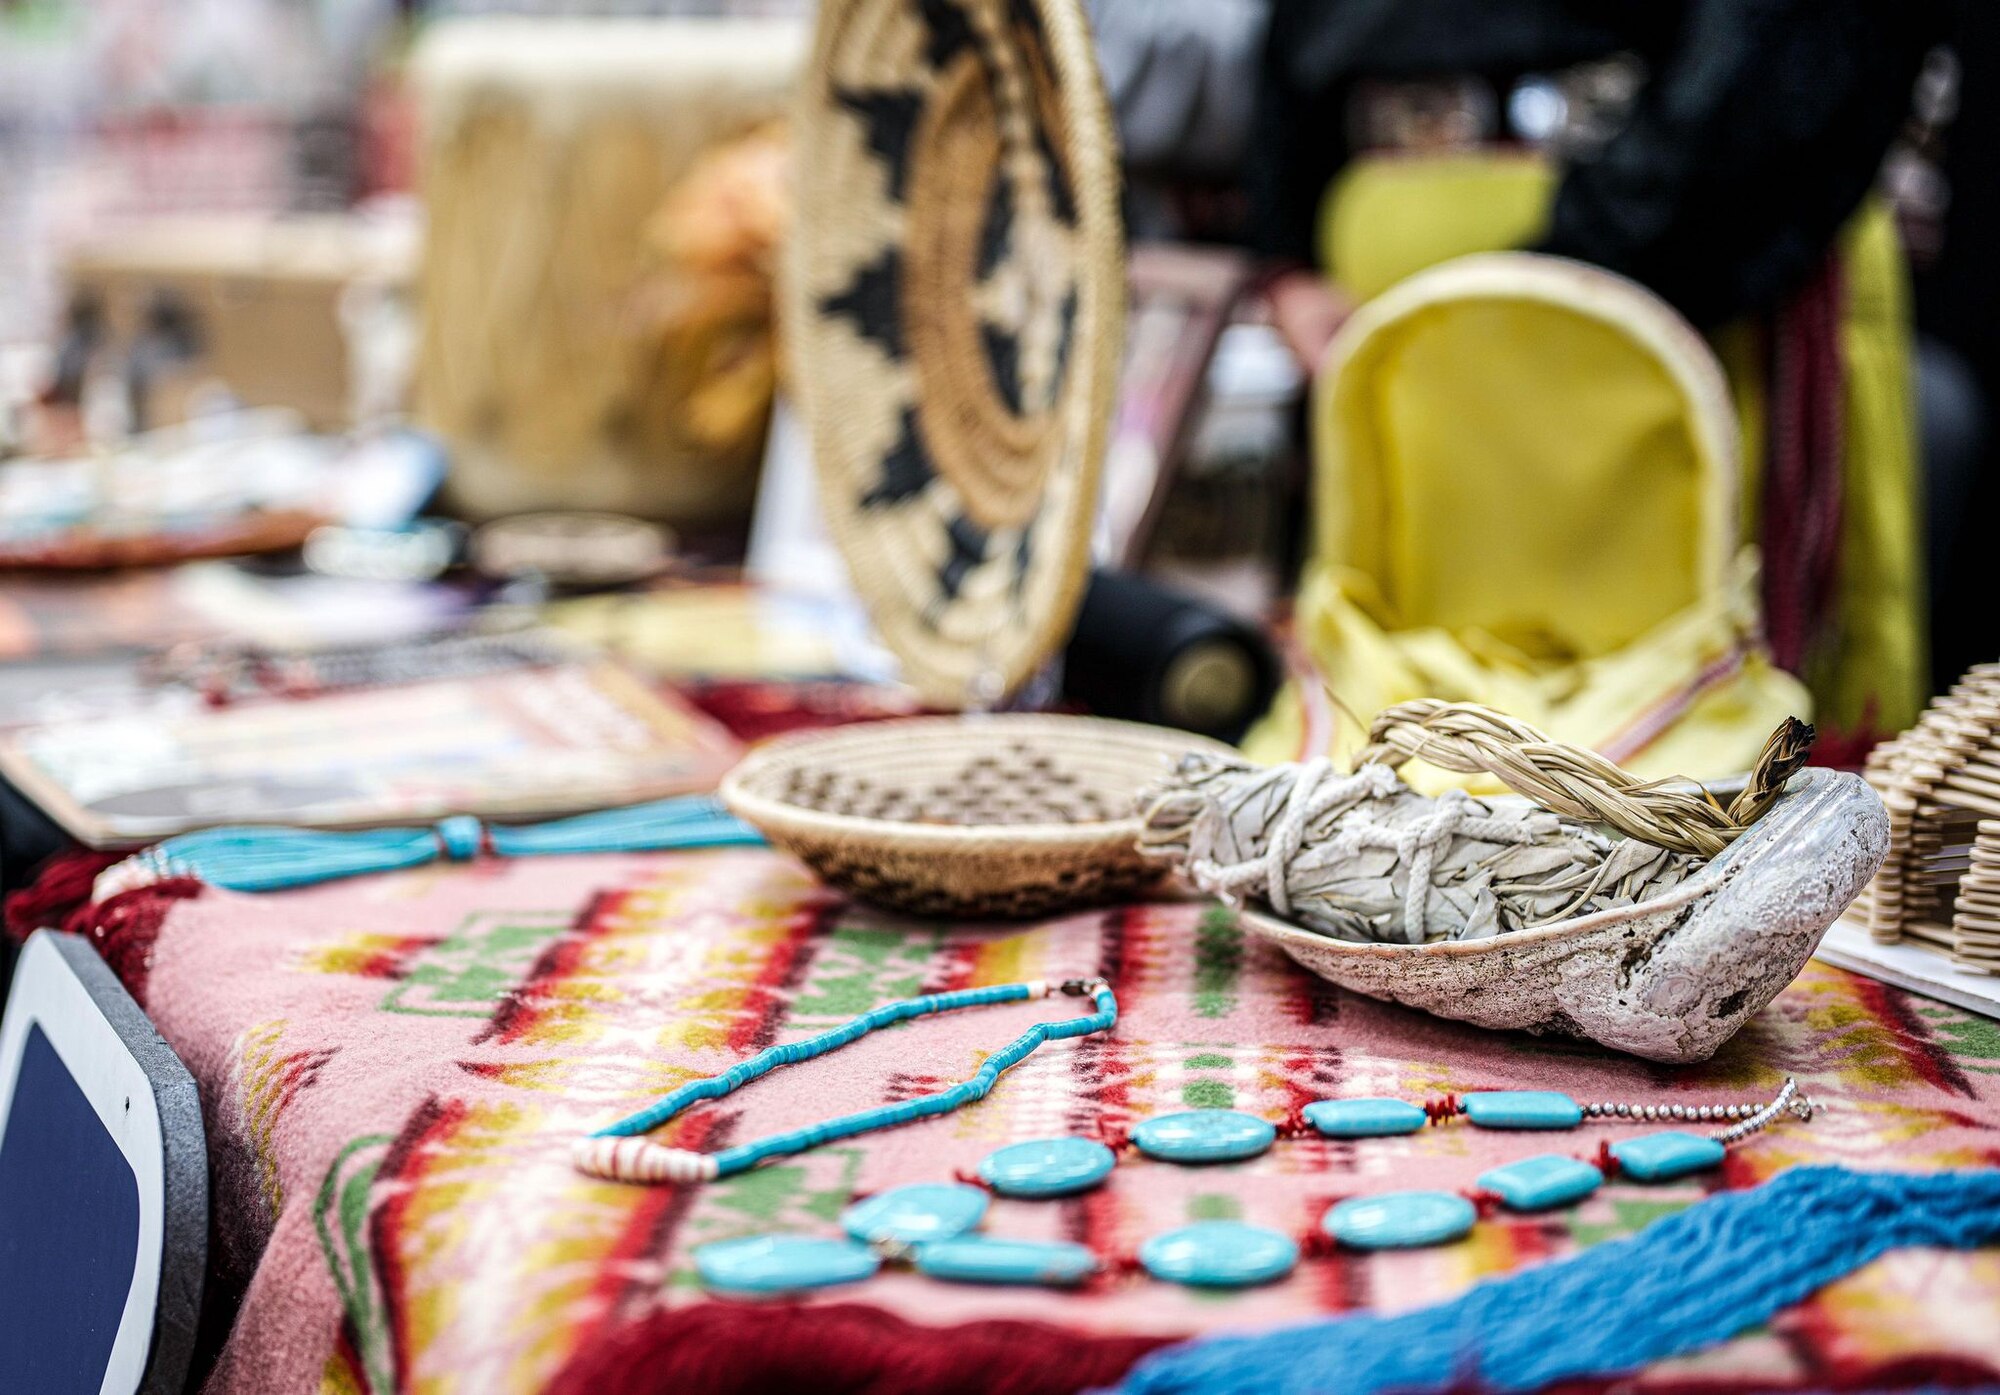 Native American items are displayed on a table under fluorescent lighting